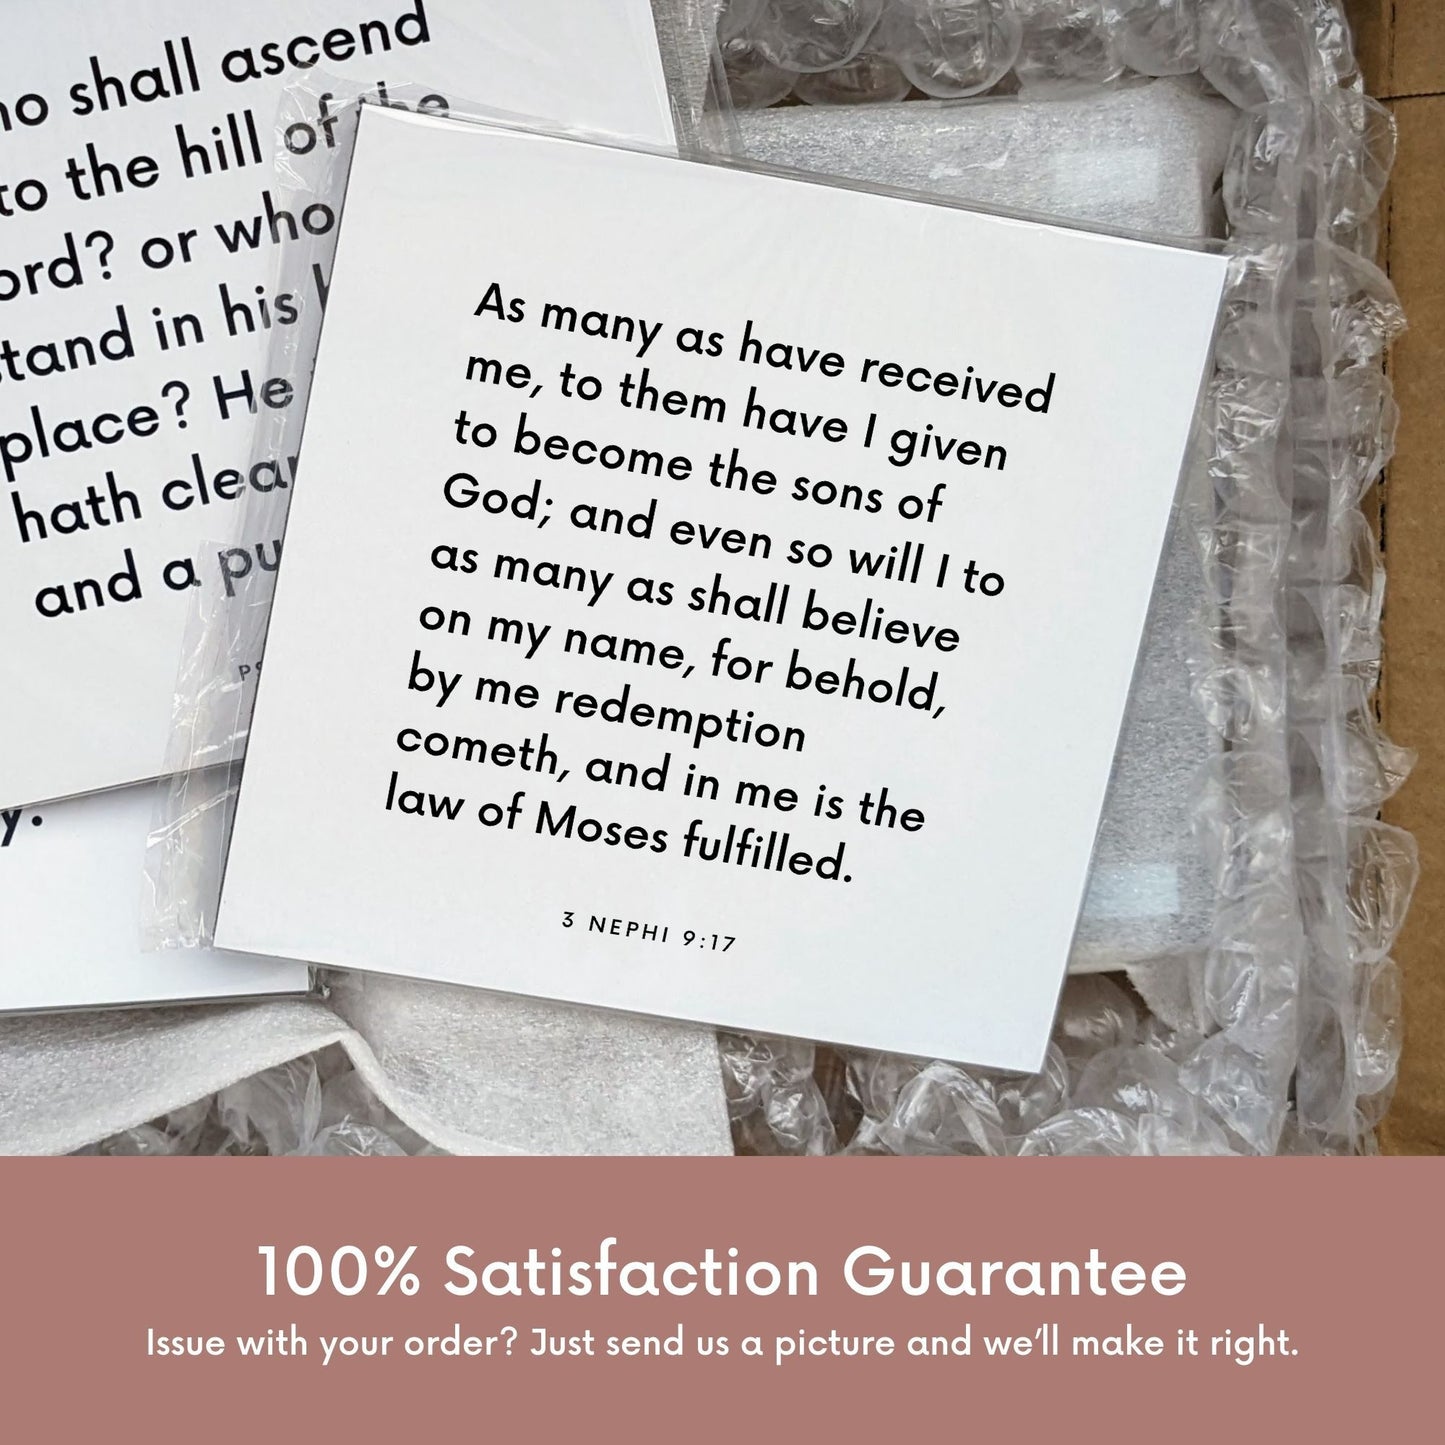 Shipping materials for scripture tile of 3 Nephi 9:17 - "Behold, by me redemption cometh"